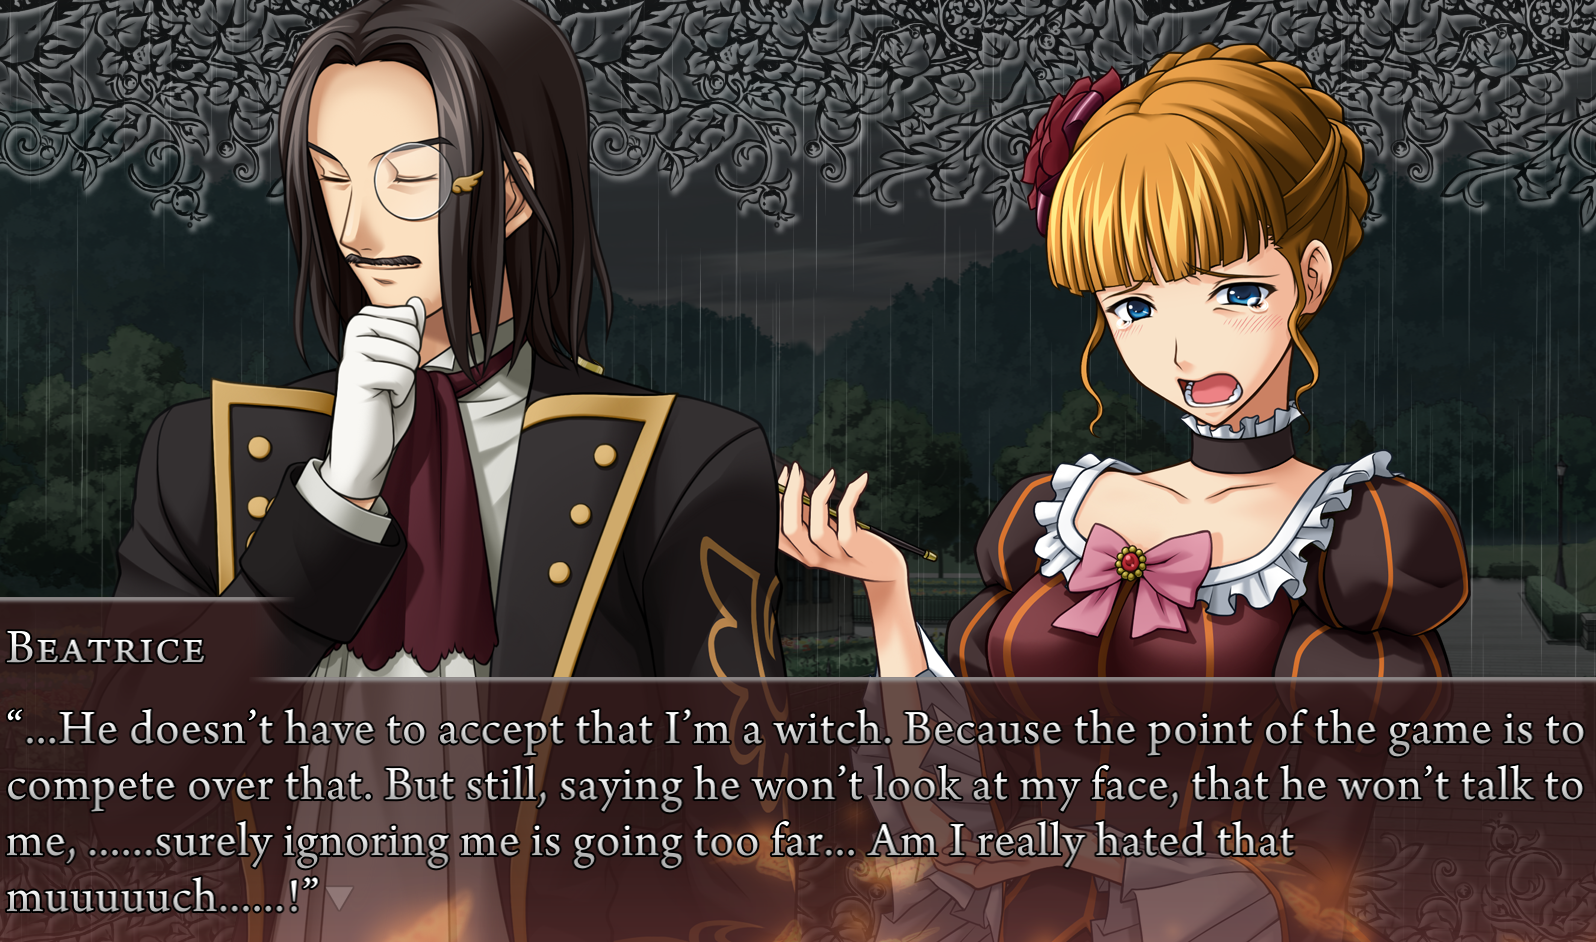 Beato: ...He doesn't have to accept that I'm a witch. Because the point of hte game is to compete over that. But still, saying he won't look at my face, that he won't talk to me, ......surely ignoring me is going too far... Am I really hated that muuuuuuch......!